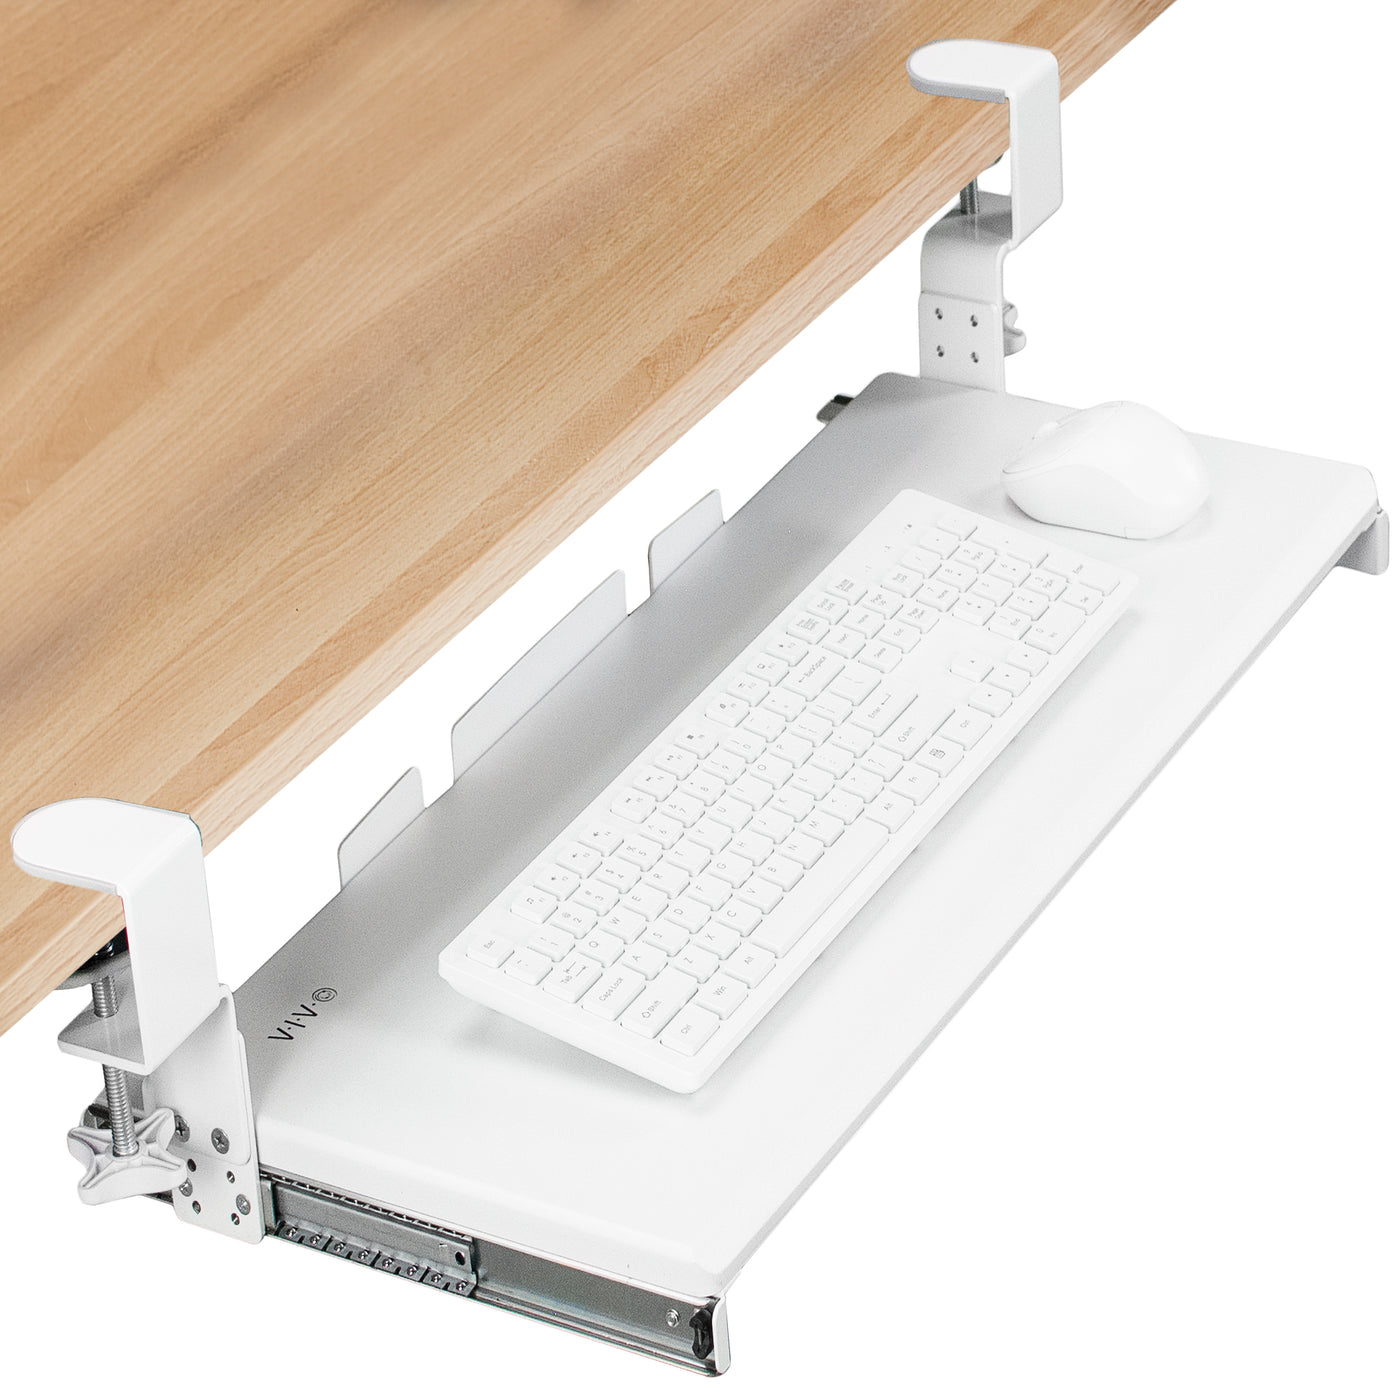 Ergonomic convenient clamp-on pullout keyboard tray.